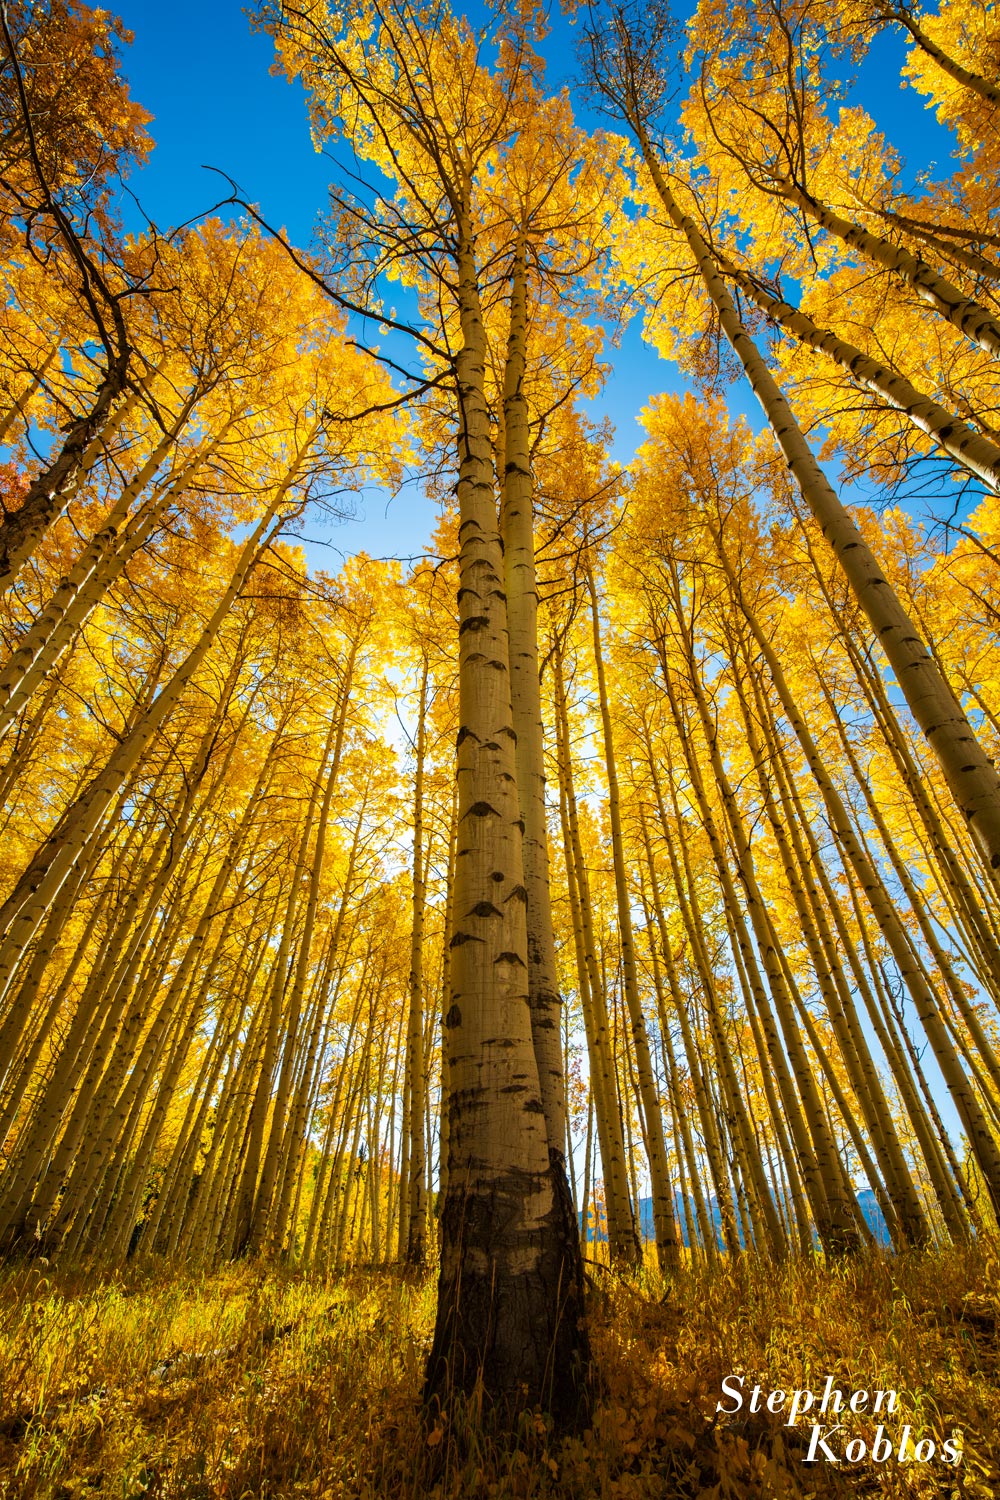 Tall aspens reaching up to the sky. Limited Edition of 100